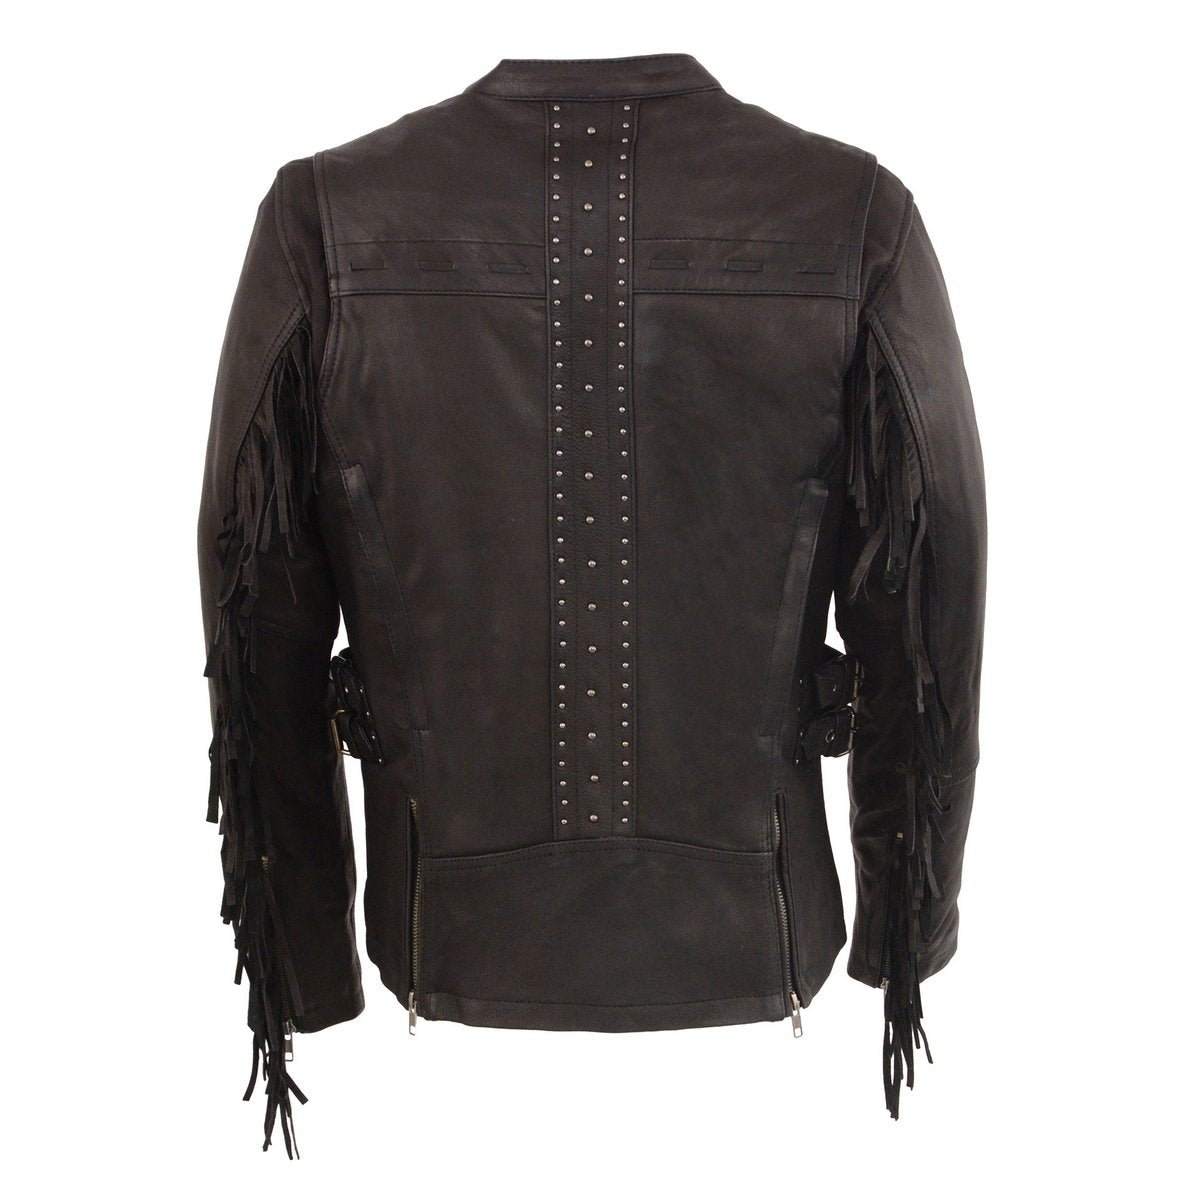 Milwaukee Leather MLL2565 Women's Lightweight Black Leather Racer Jacket with Fringe Detailing